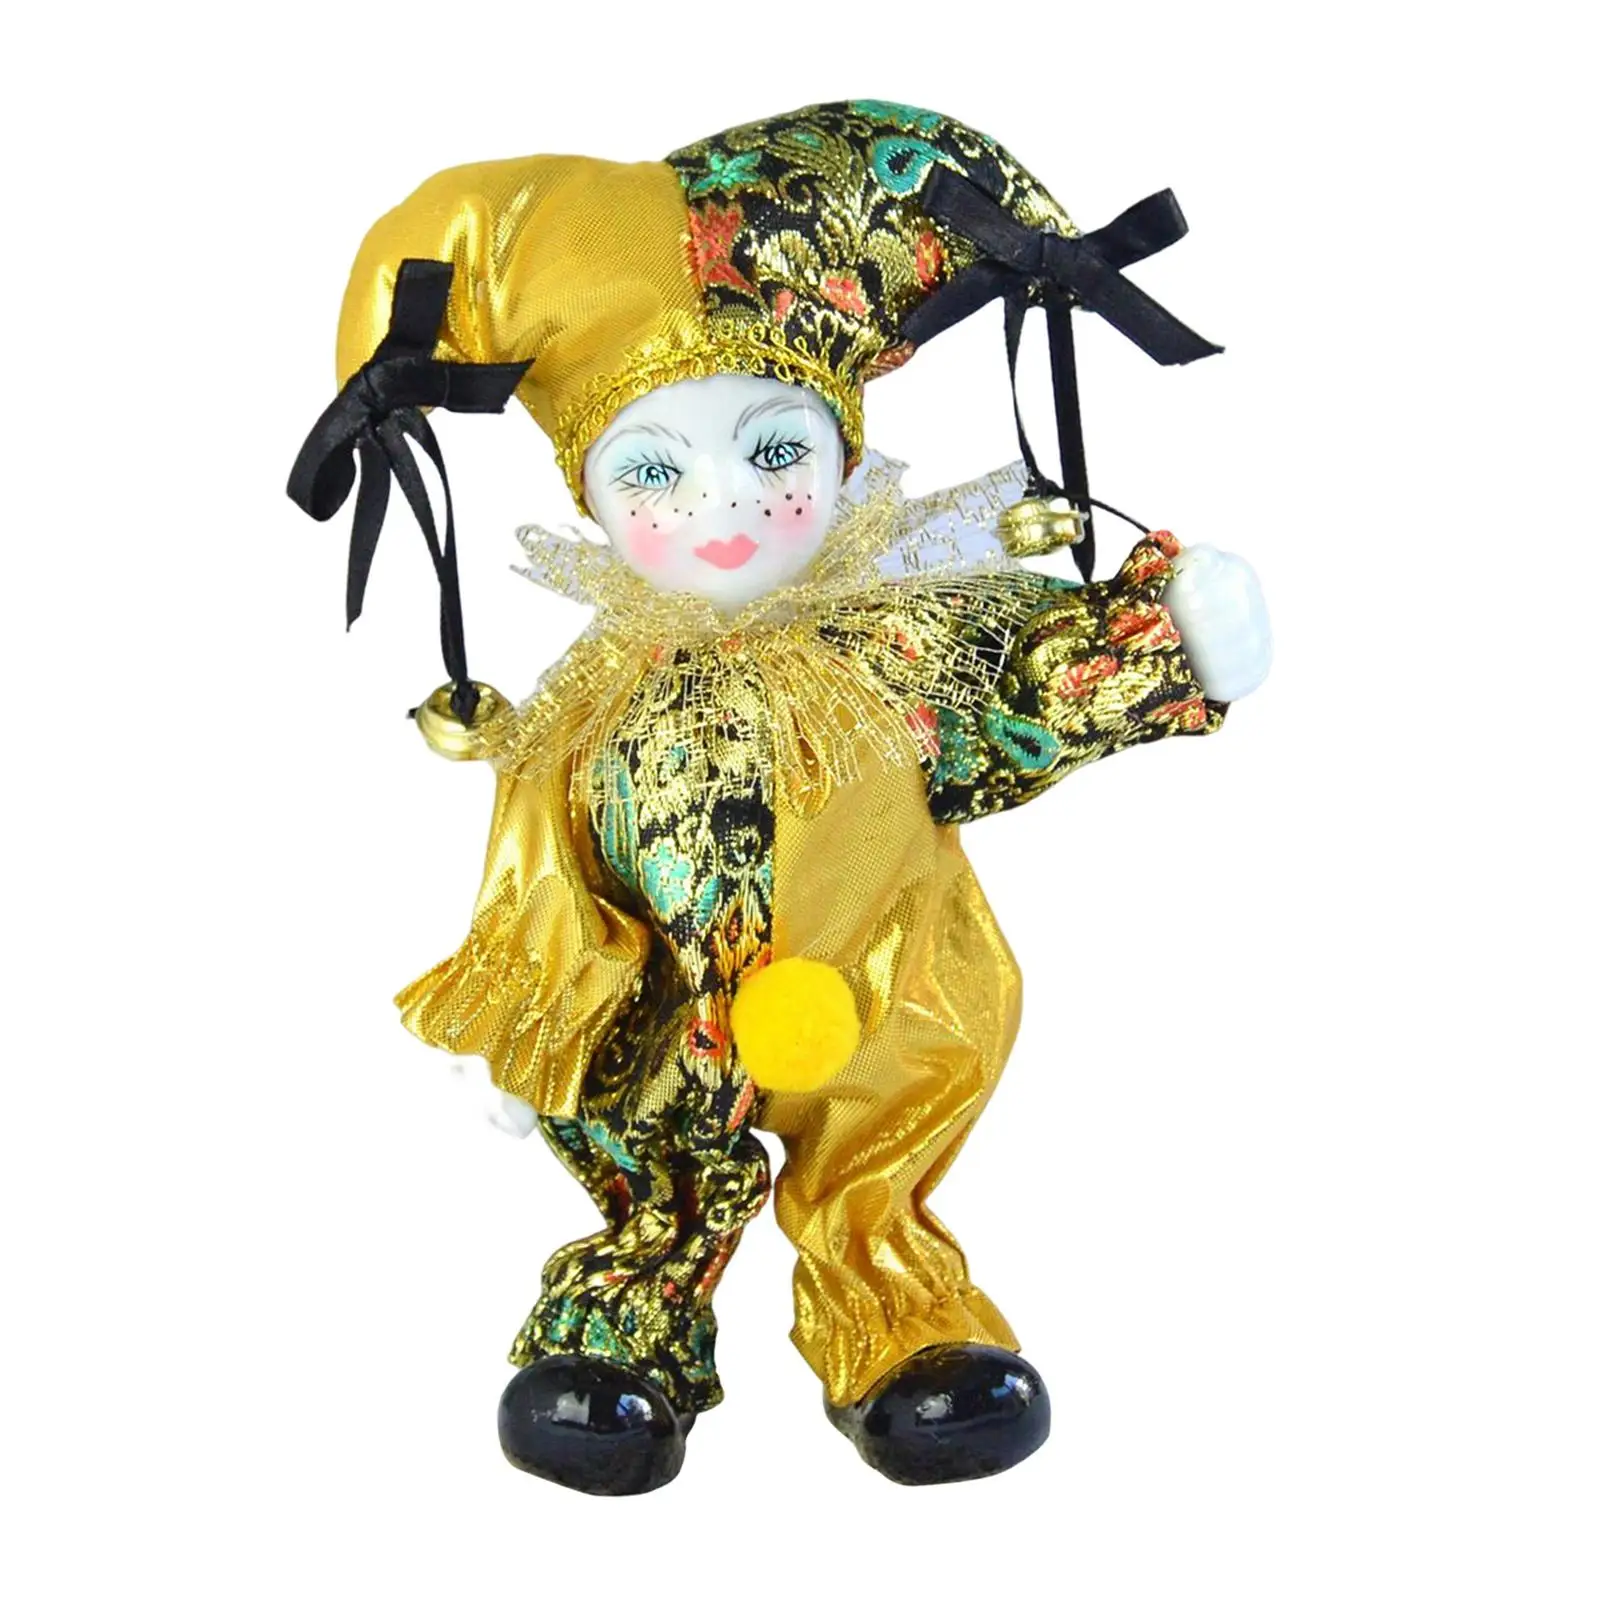 Triangel Doll with Outfits Display Ornament Home Decoration Small Clown Doll Arts for Holiday Valentin Gift Kids Toy Collections